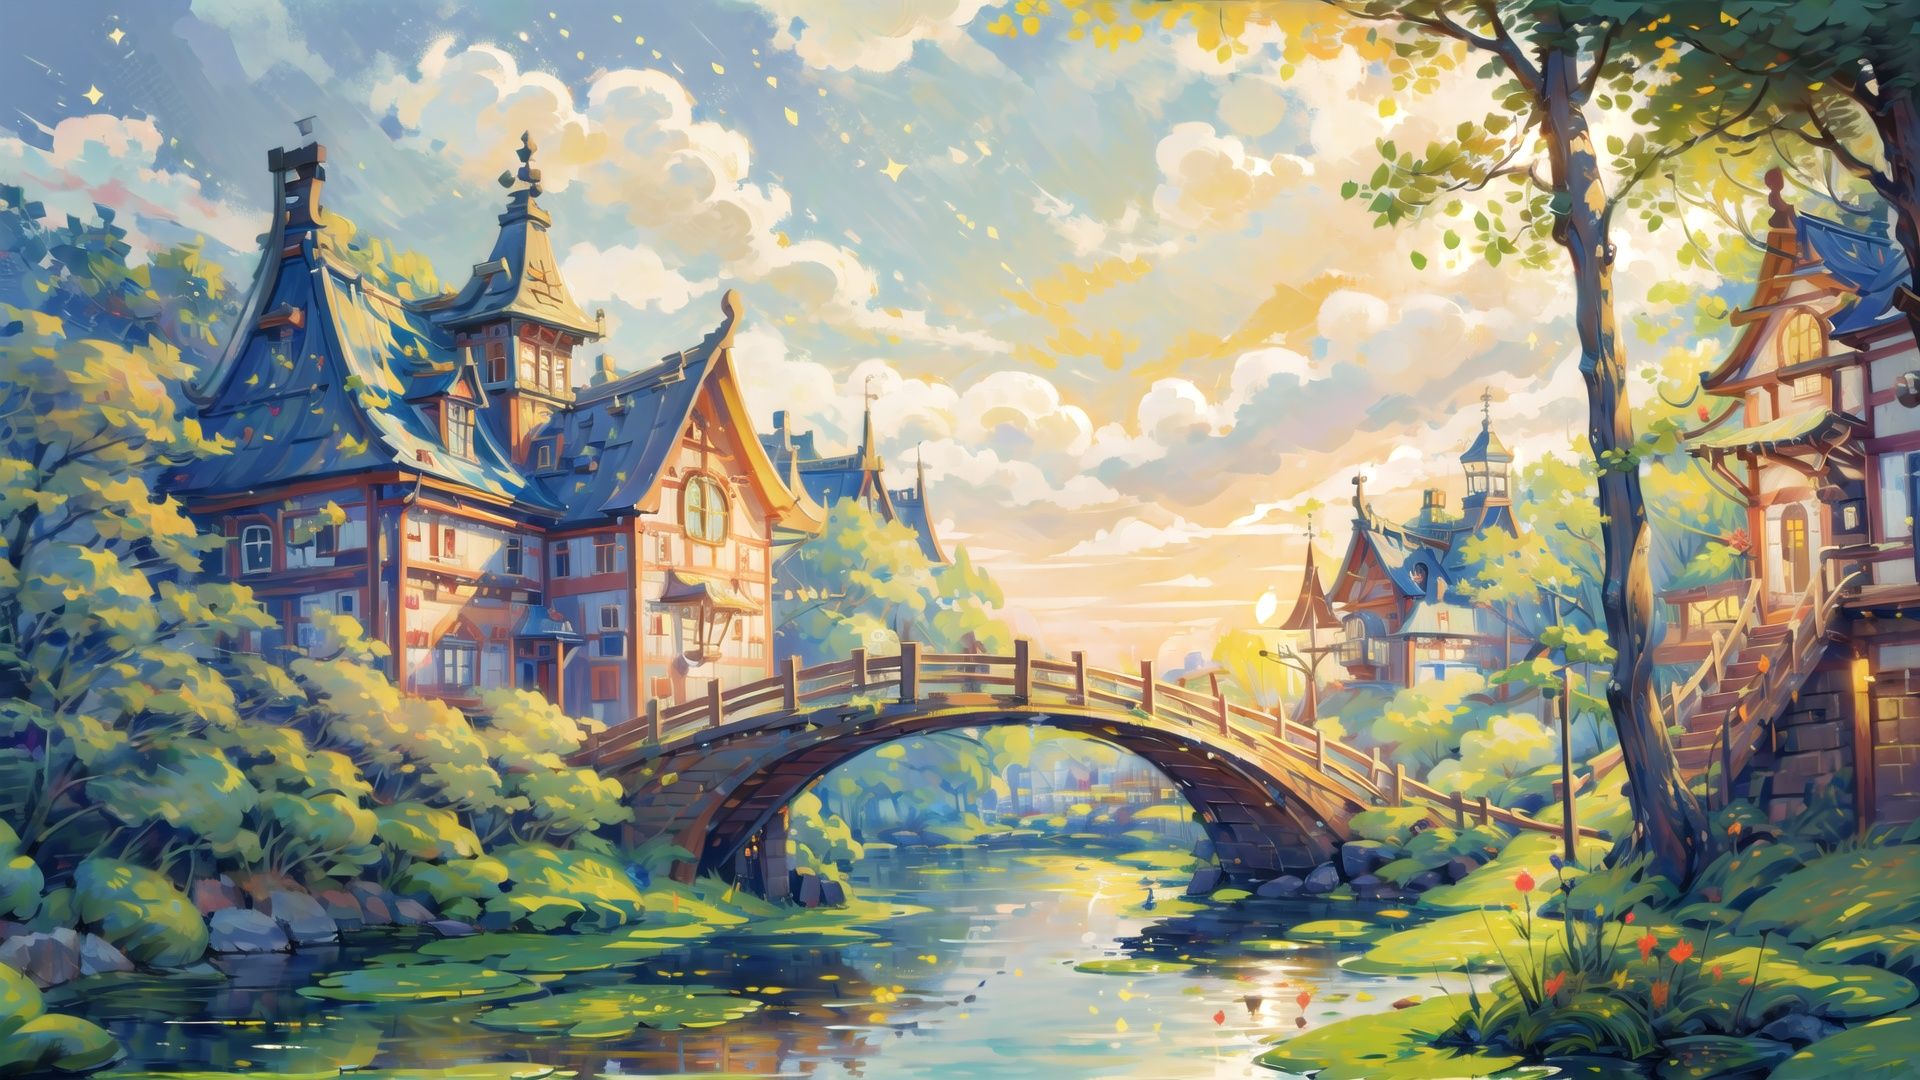  (((masterpiece))), ((extremely detailed CG unity 8k wallpaper)), best quality, high resolution illustration, Amazing, highres, intricate detail, (best illumination, best shadow, an extremely delicate and beautiful),

2D ConceptualDesign, scenery, lily pad, outdoors, sky, cloud, no humans, day, water, building, blue sky, tree, boat, watercraft, house, bridge, fantasy, Oil painting, bichu